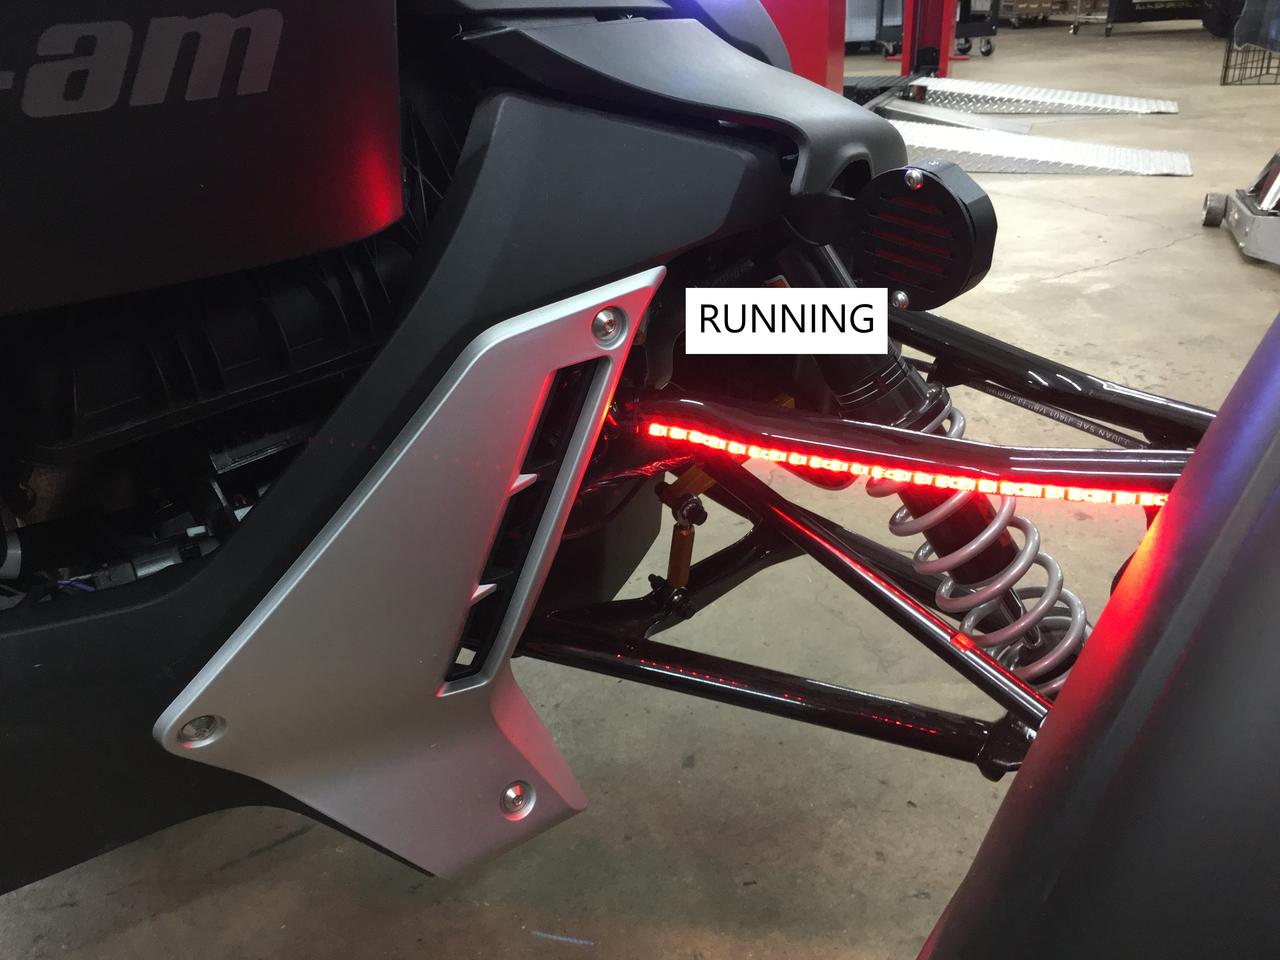 A-Arm Running/Turn Signal LED Lighting Kit - Add On to Existing Wiring (Ryker Models)